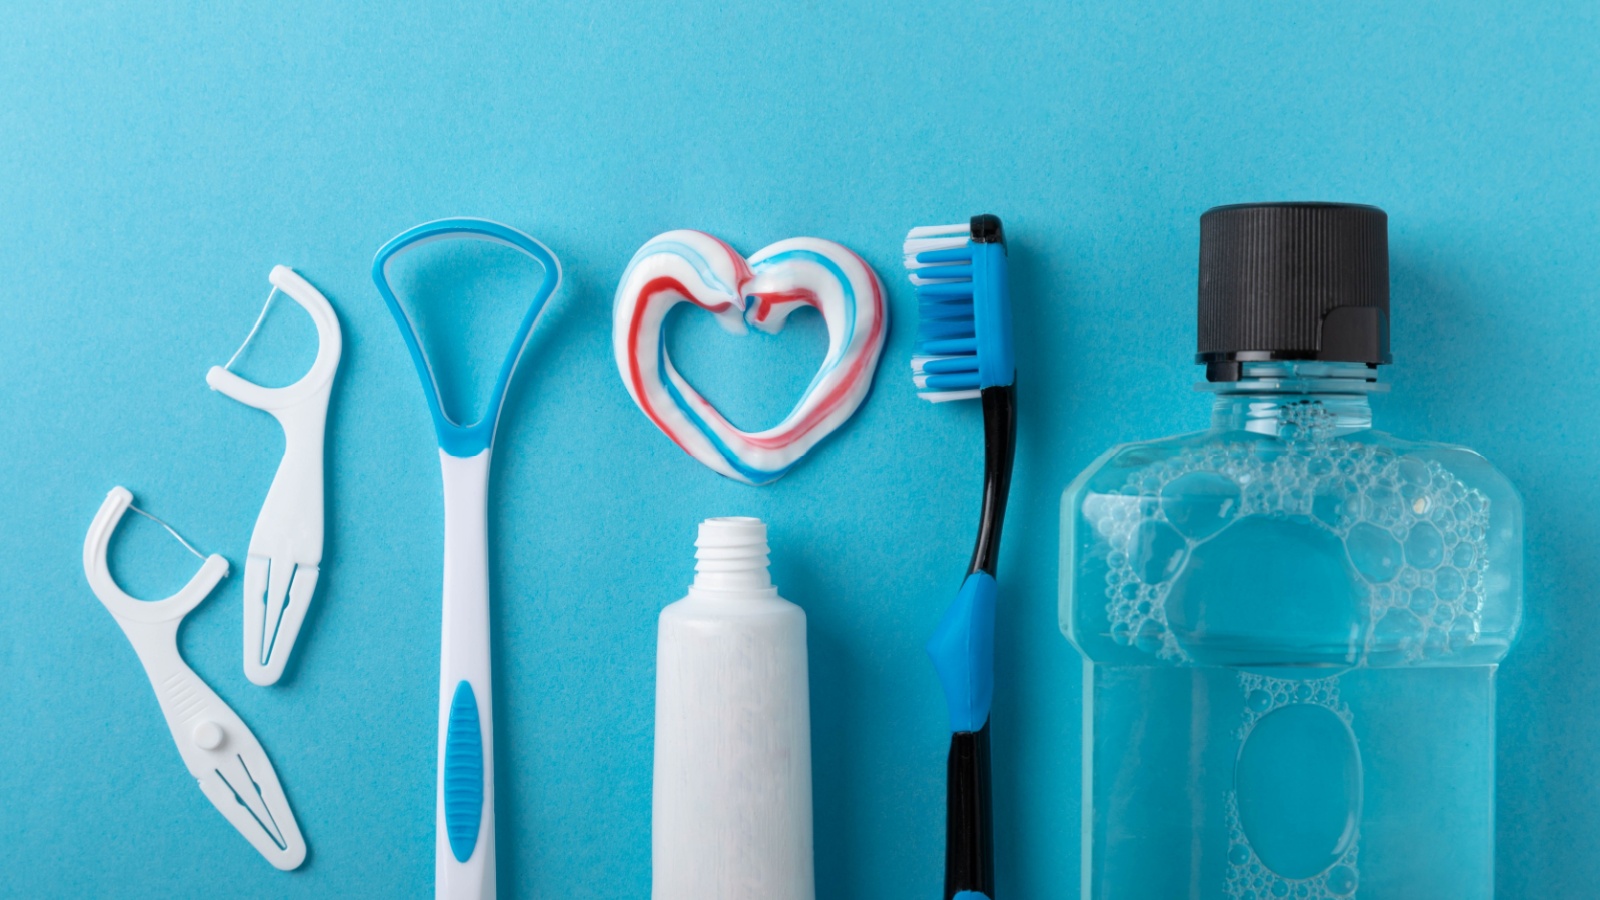 Toothbrush, tongue cleaner, floss, toothpaste tube and mouthwash on blue background with copy space. Flat lay. Dental hygiene. Oral care kit.